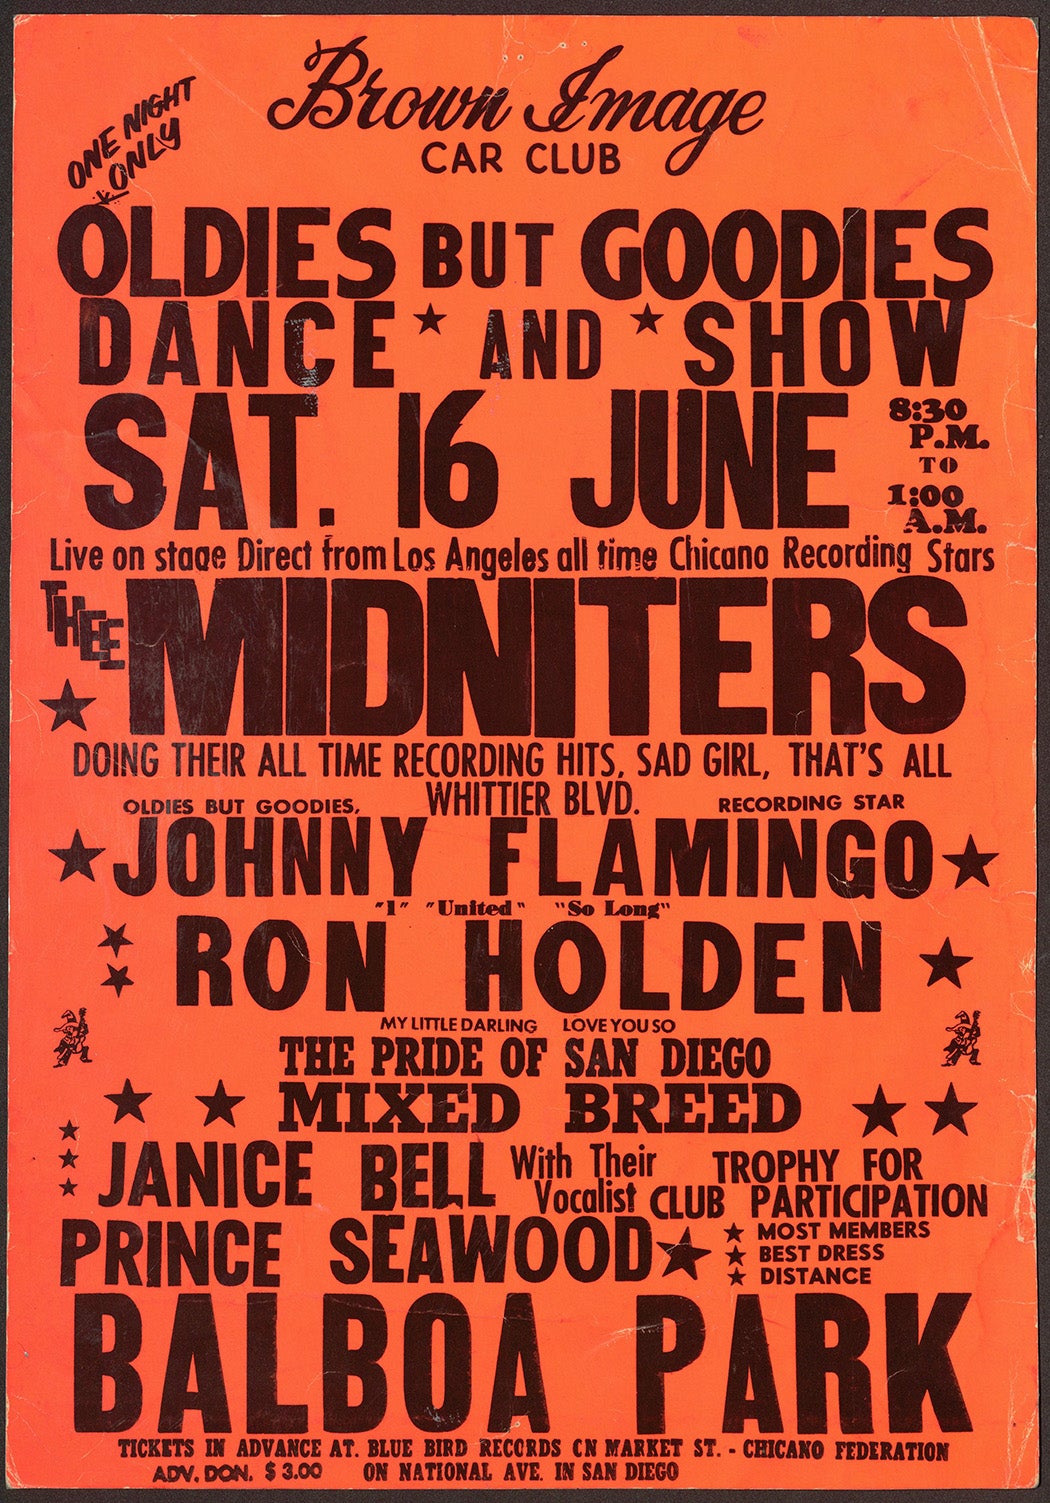 Brown Image Car Club: Poster advertising a dance and show ("Oldies But Goodies") at Balboa Park featuring Thee Midniters